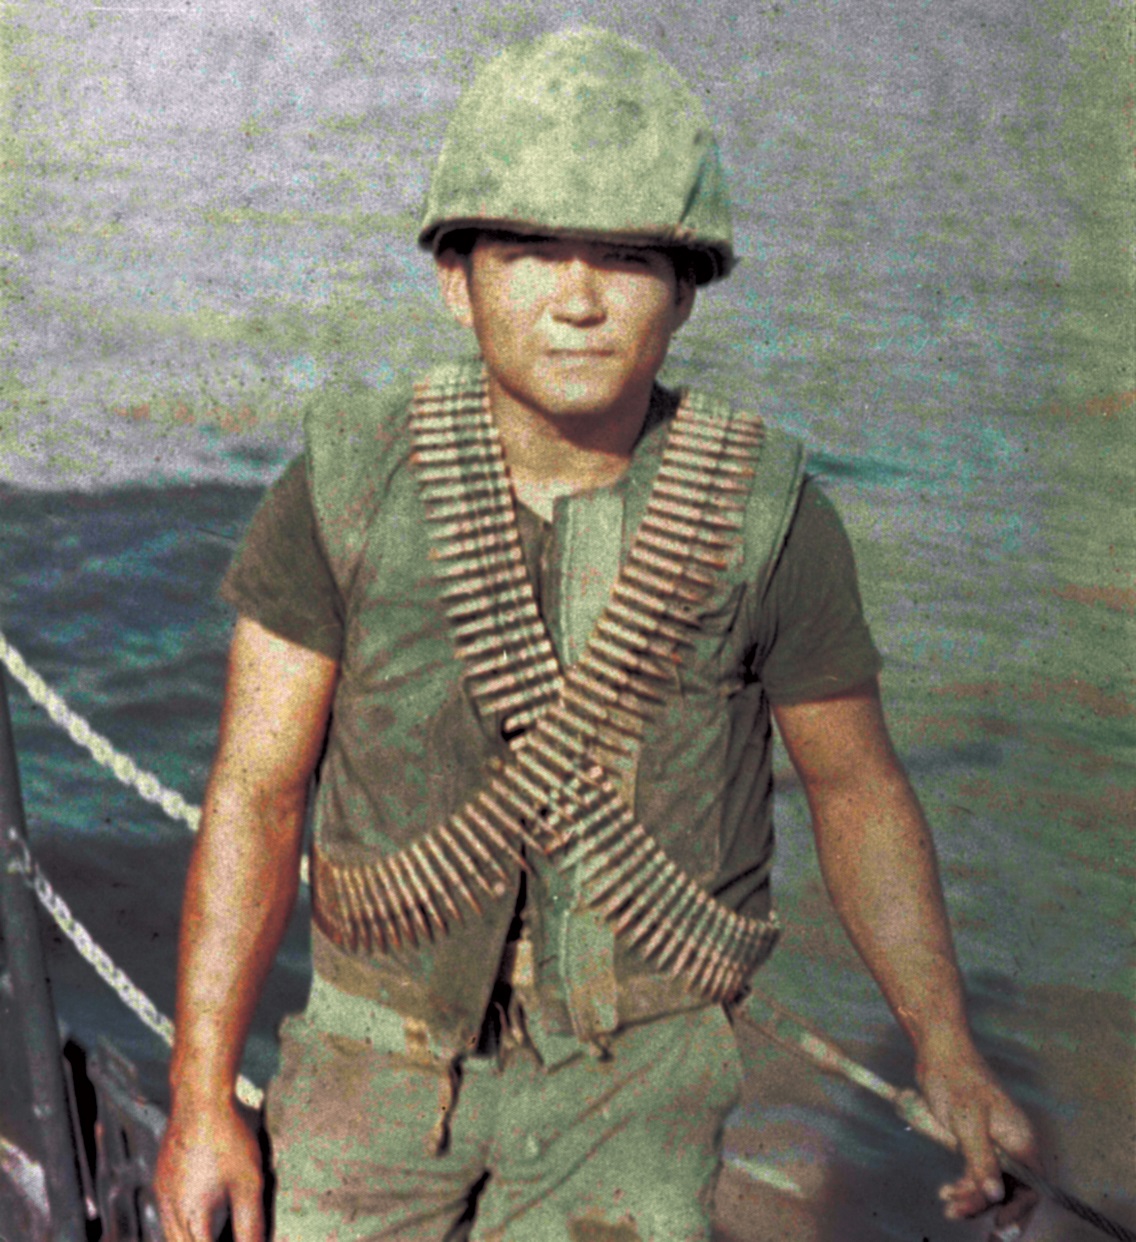 Fireman Heriberto Hernandez, who was killed in action, posthumously received the Bronze Star and Purple Heart medals, and is the namesake for one of the service’s Fast Response Cutters. (U.S. Coast Guard)